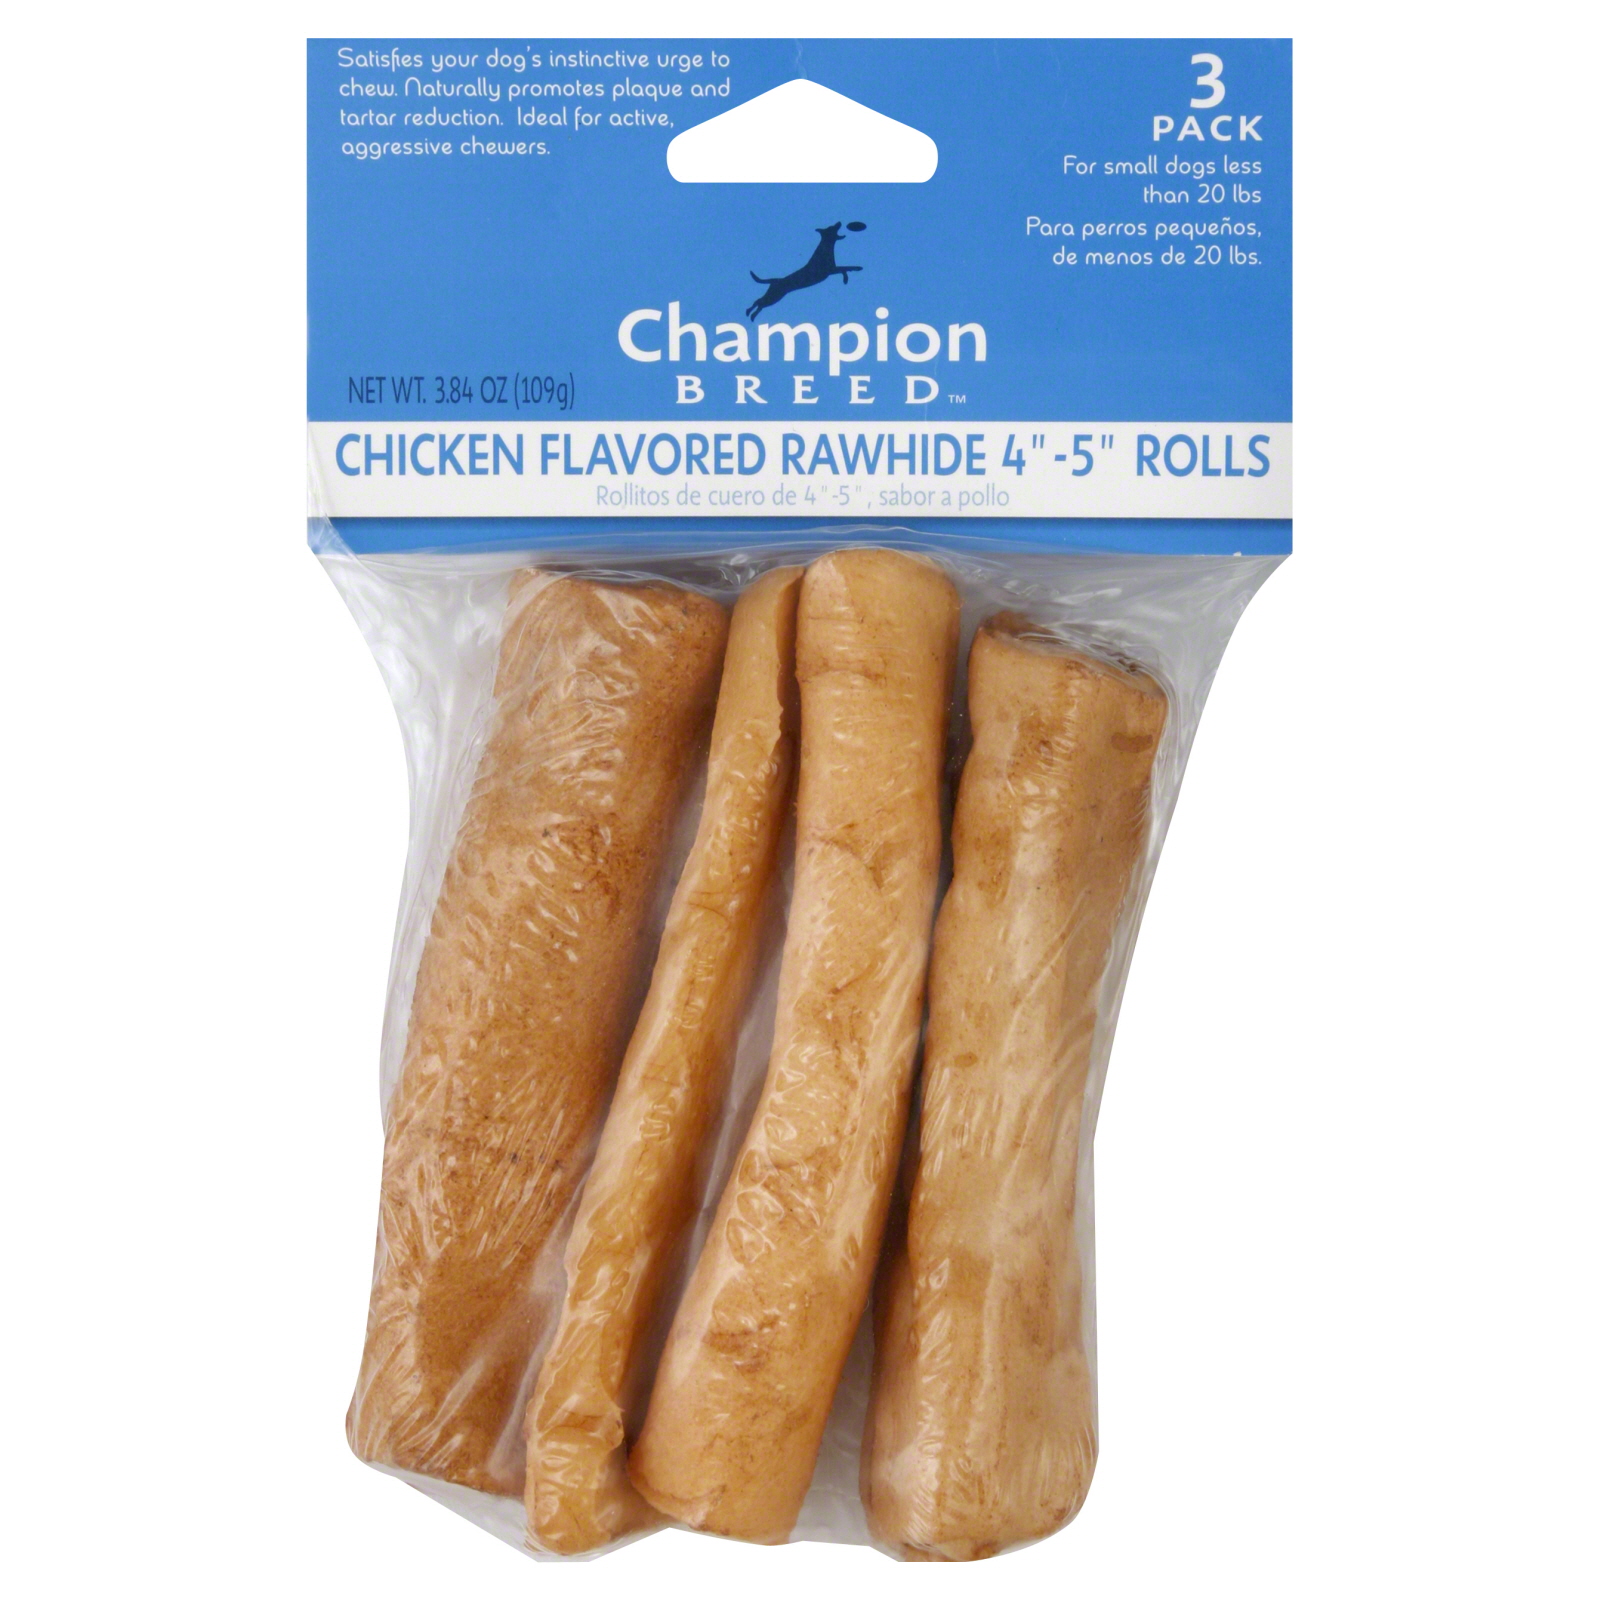 Champion Breed Chicken Flavored Rawhide Rolls 4"-5" 3-Pack